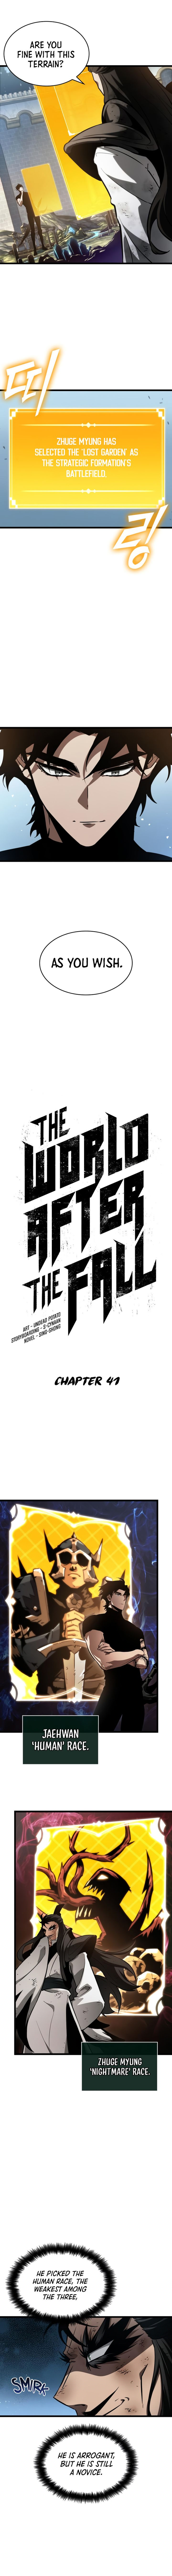 the_world_after_the_fall_41_7